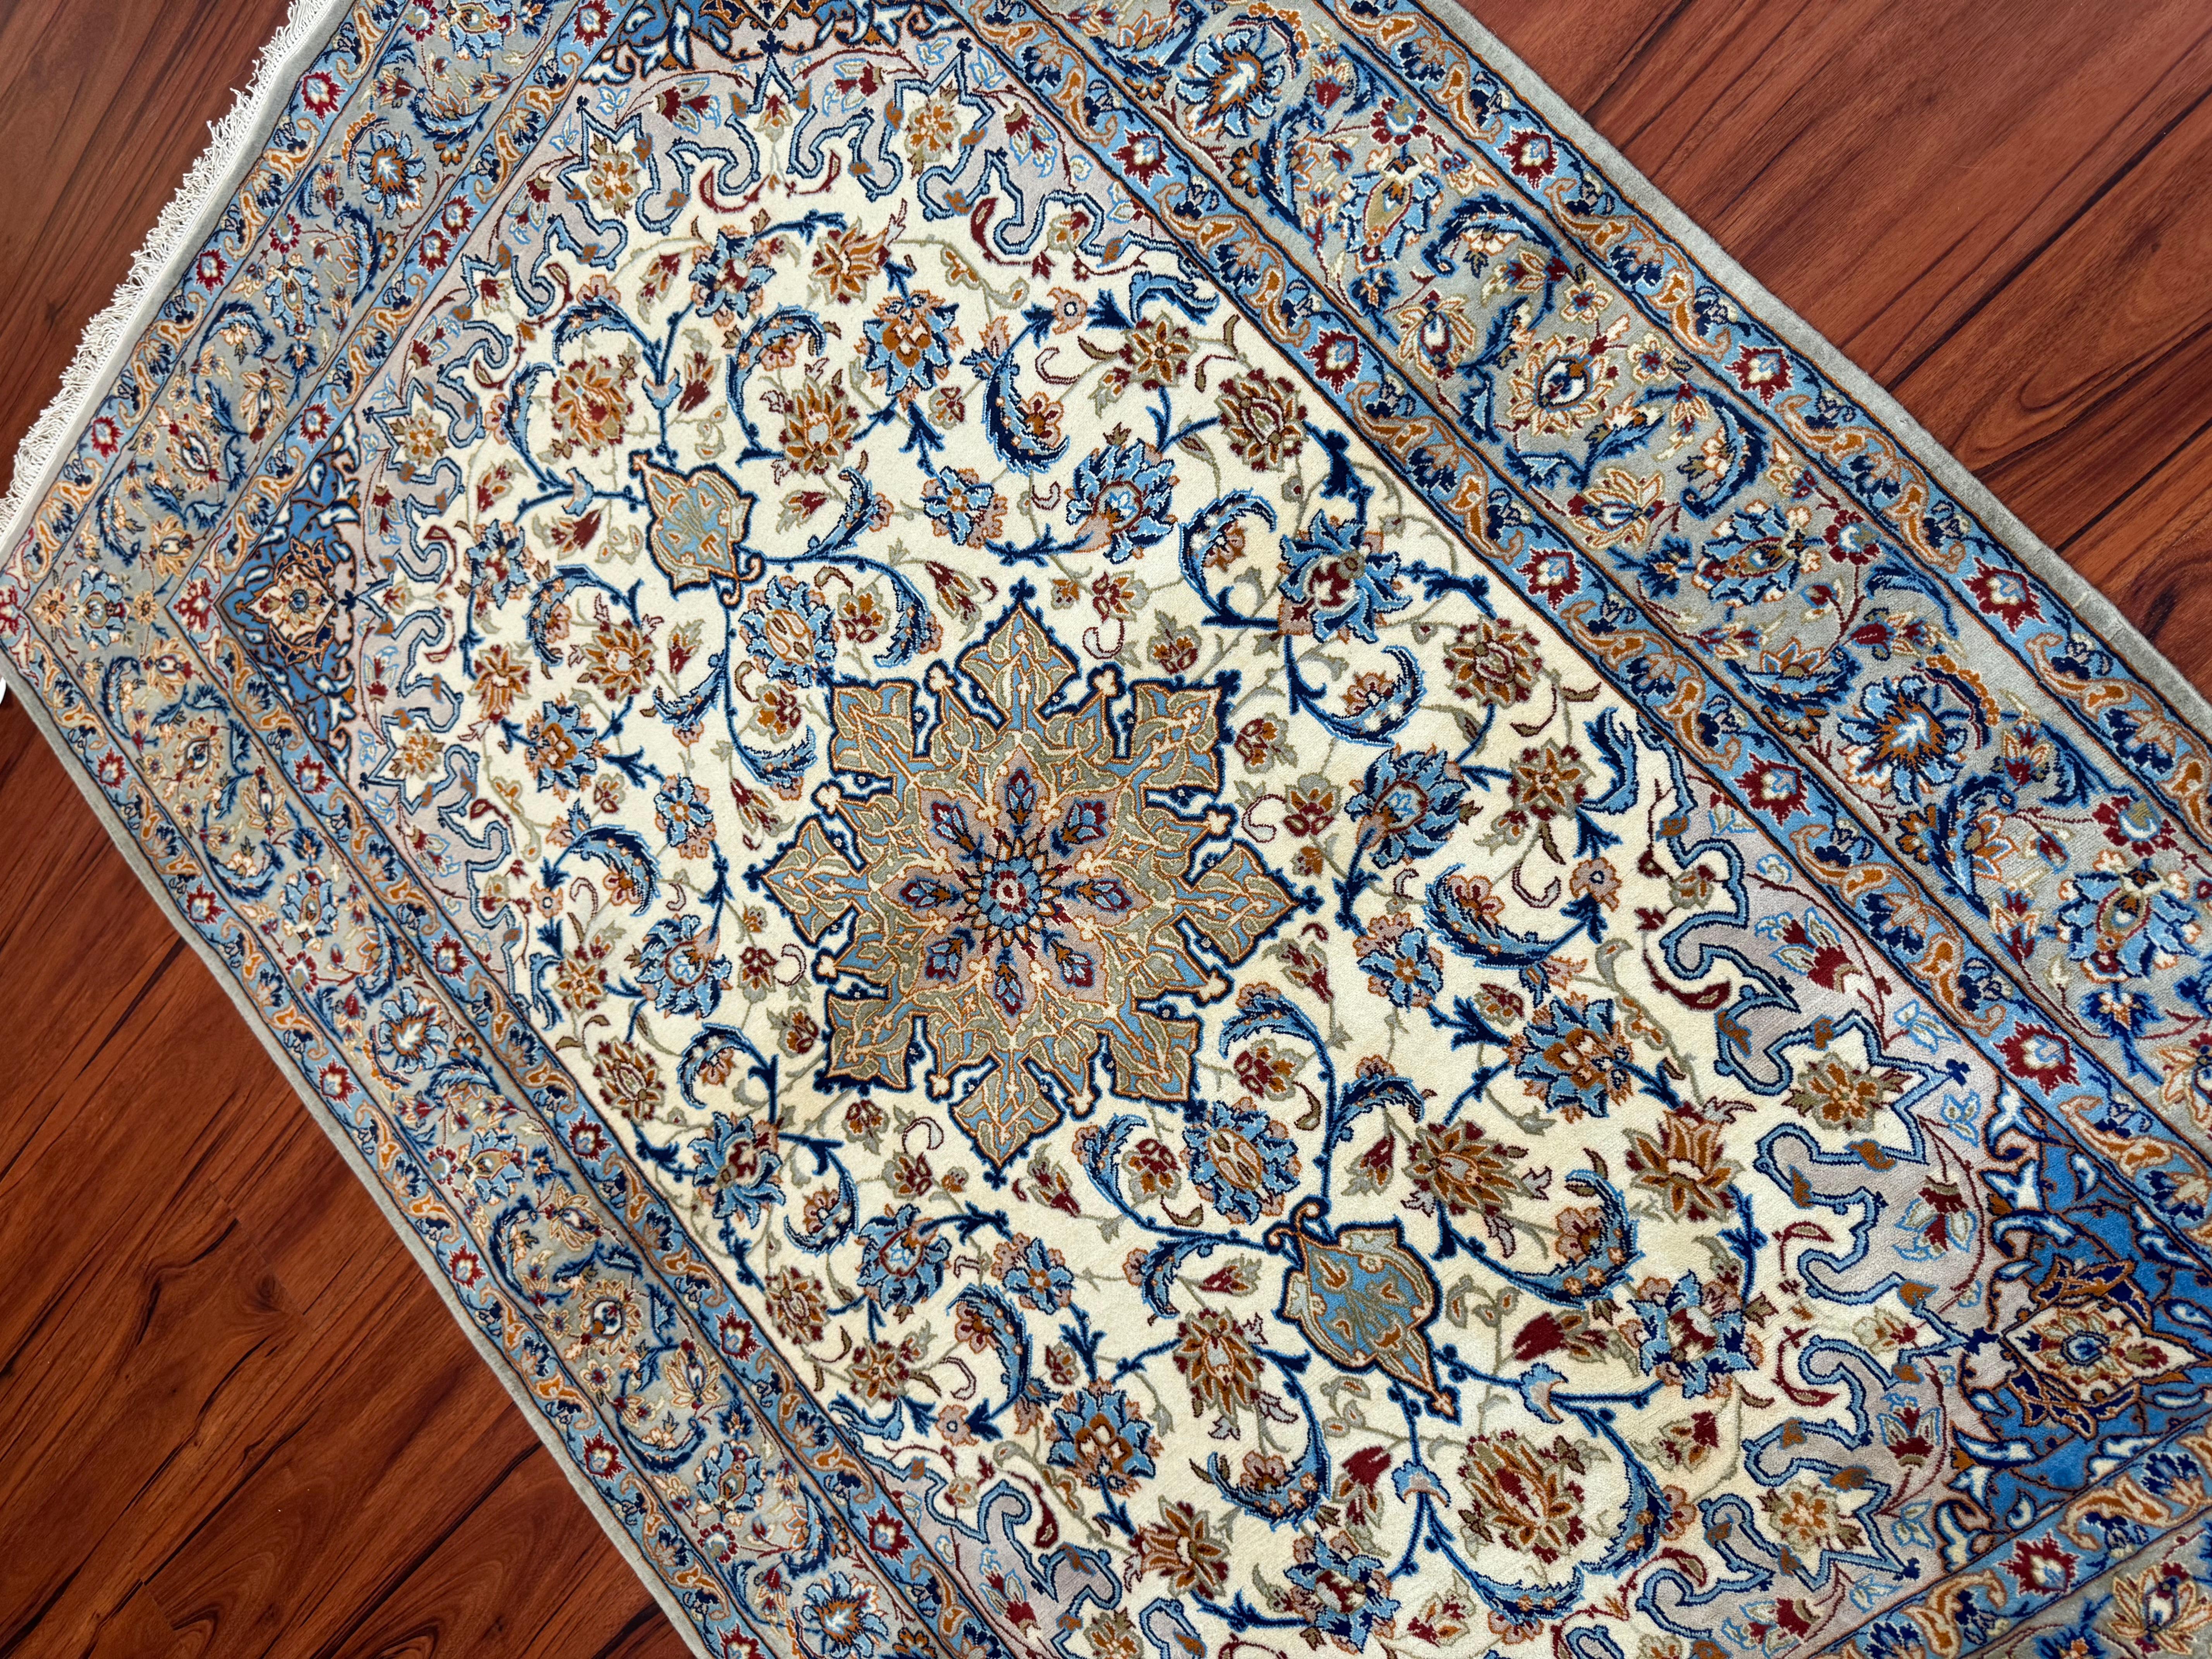 A stunning Persian Isfahan Rug that originates from Iran in the mid-20th century. This rug is in excellent condition and is made from silk&wool! It has a gorgeous design to match the beautiful colors of the rug that truly make this rug unique!